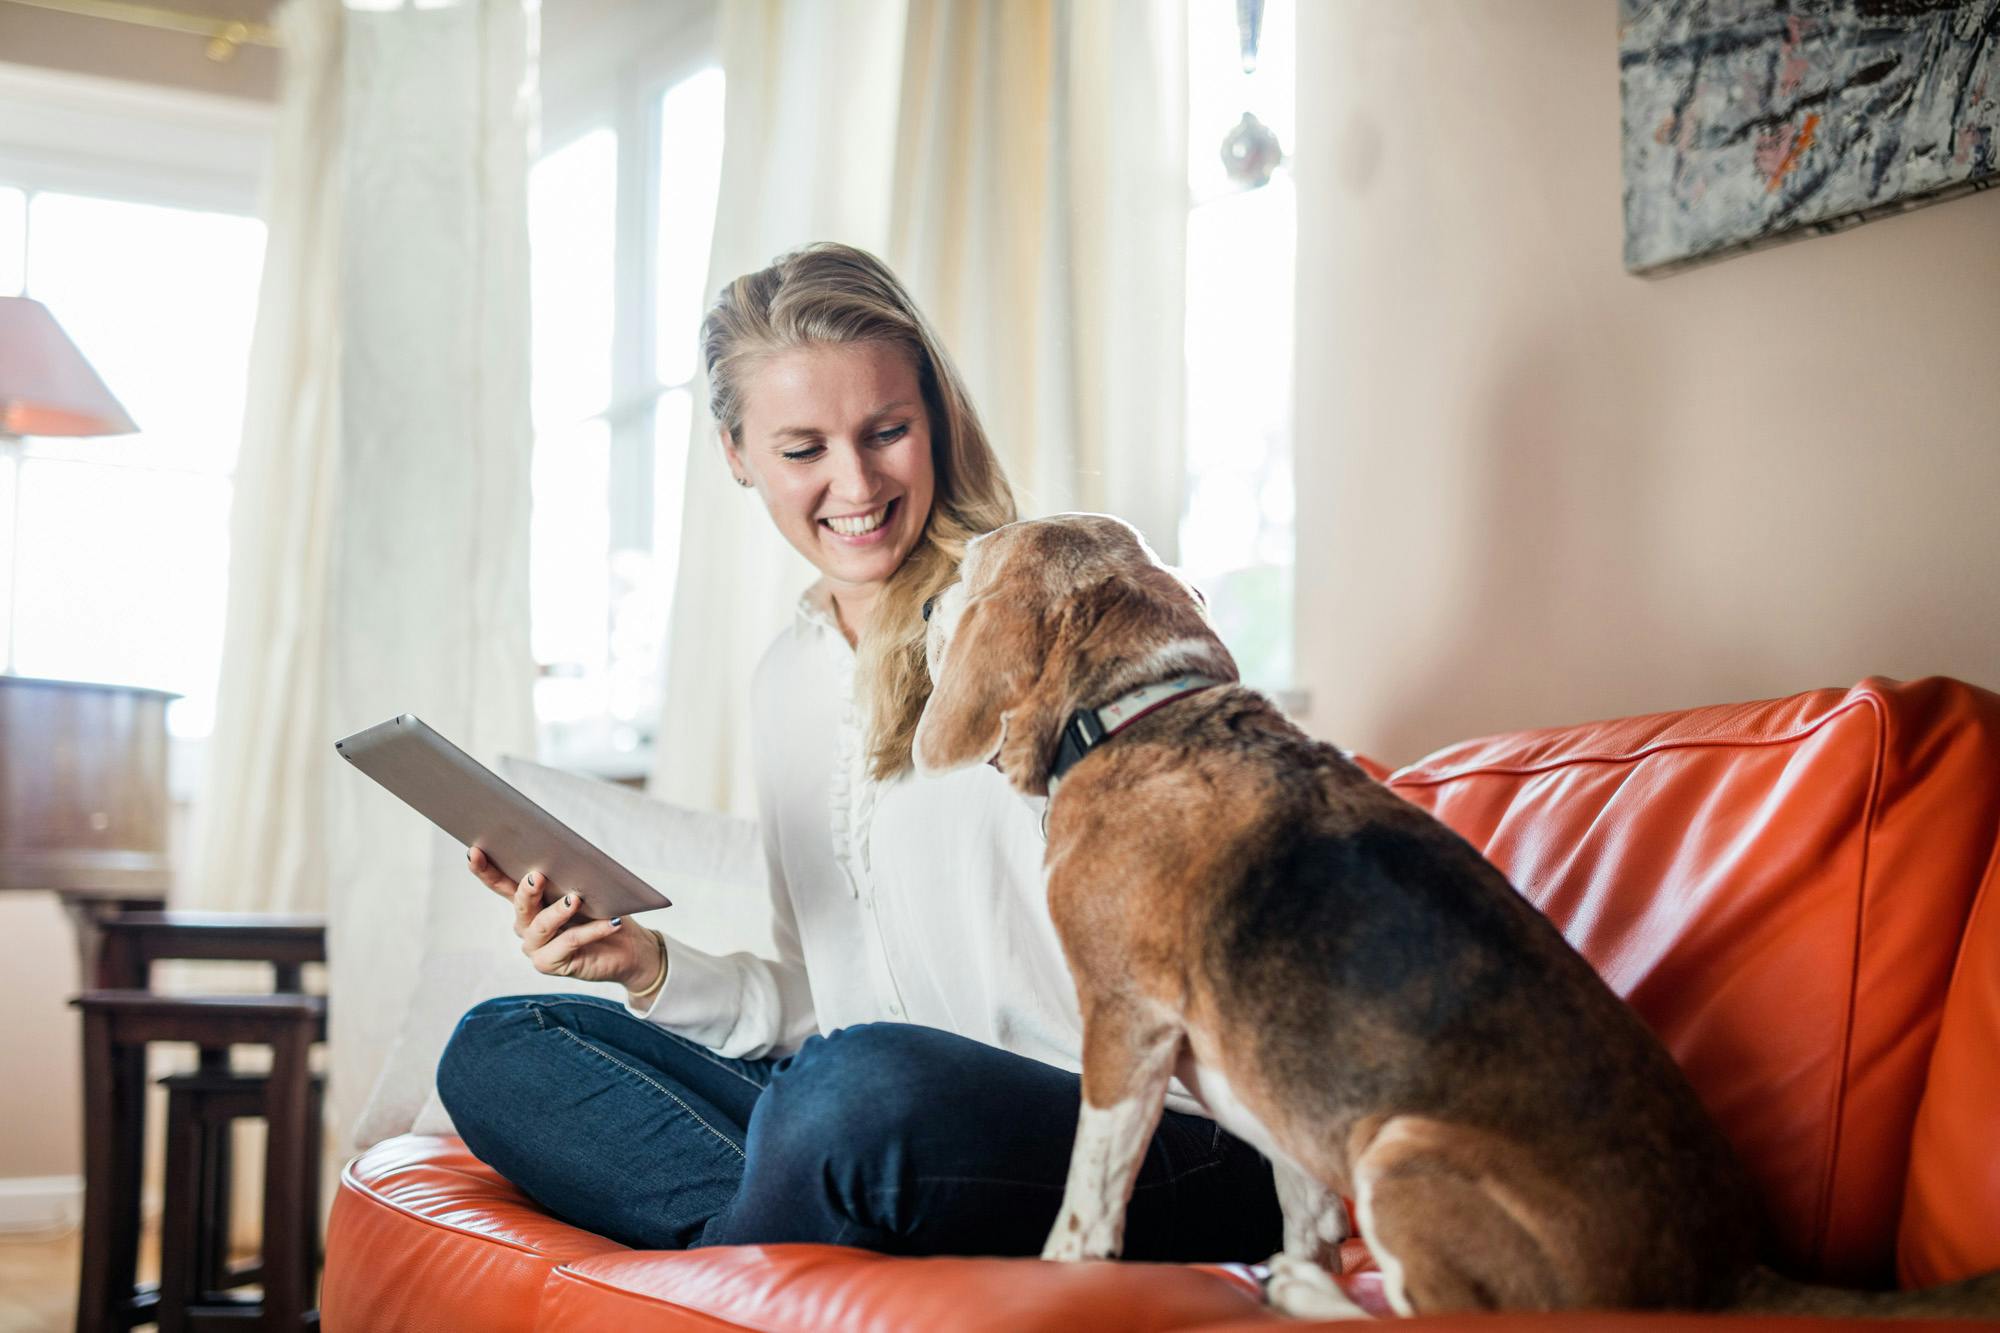 woman and dog sitting on couch making eye contact